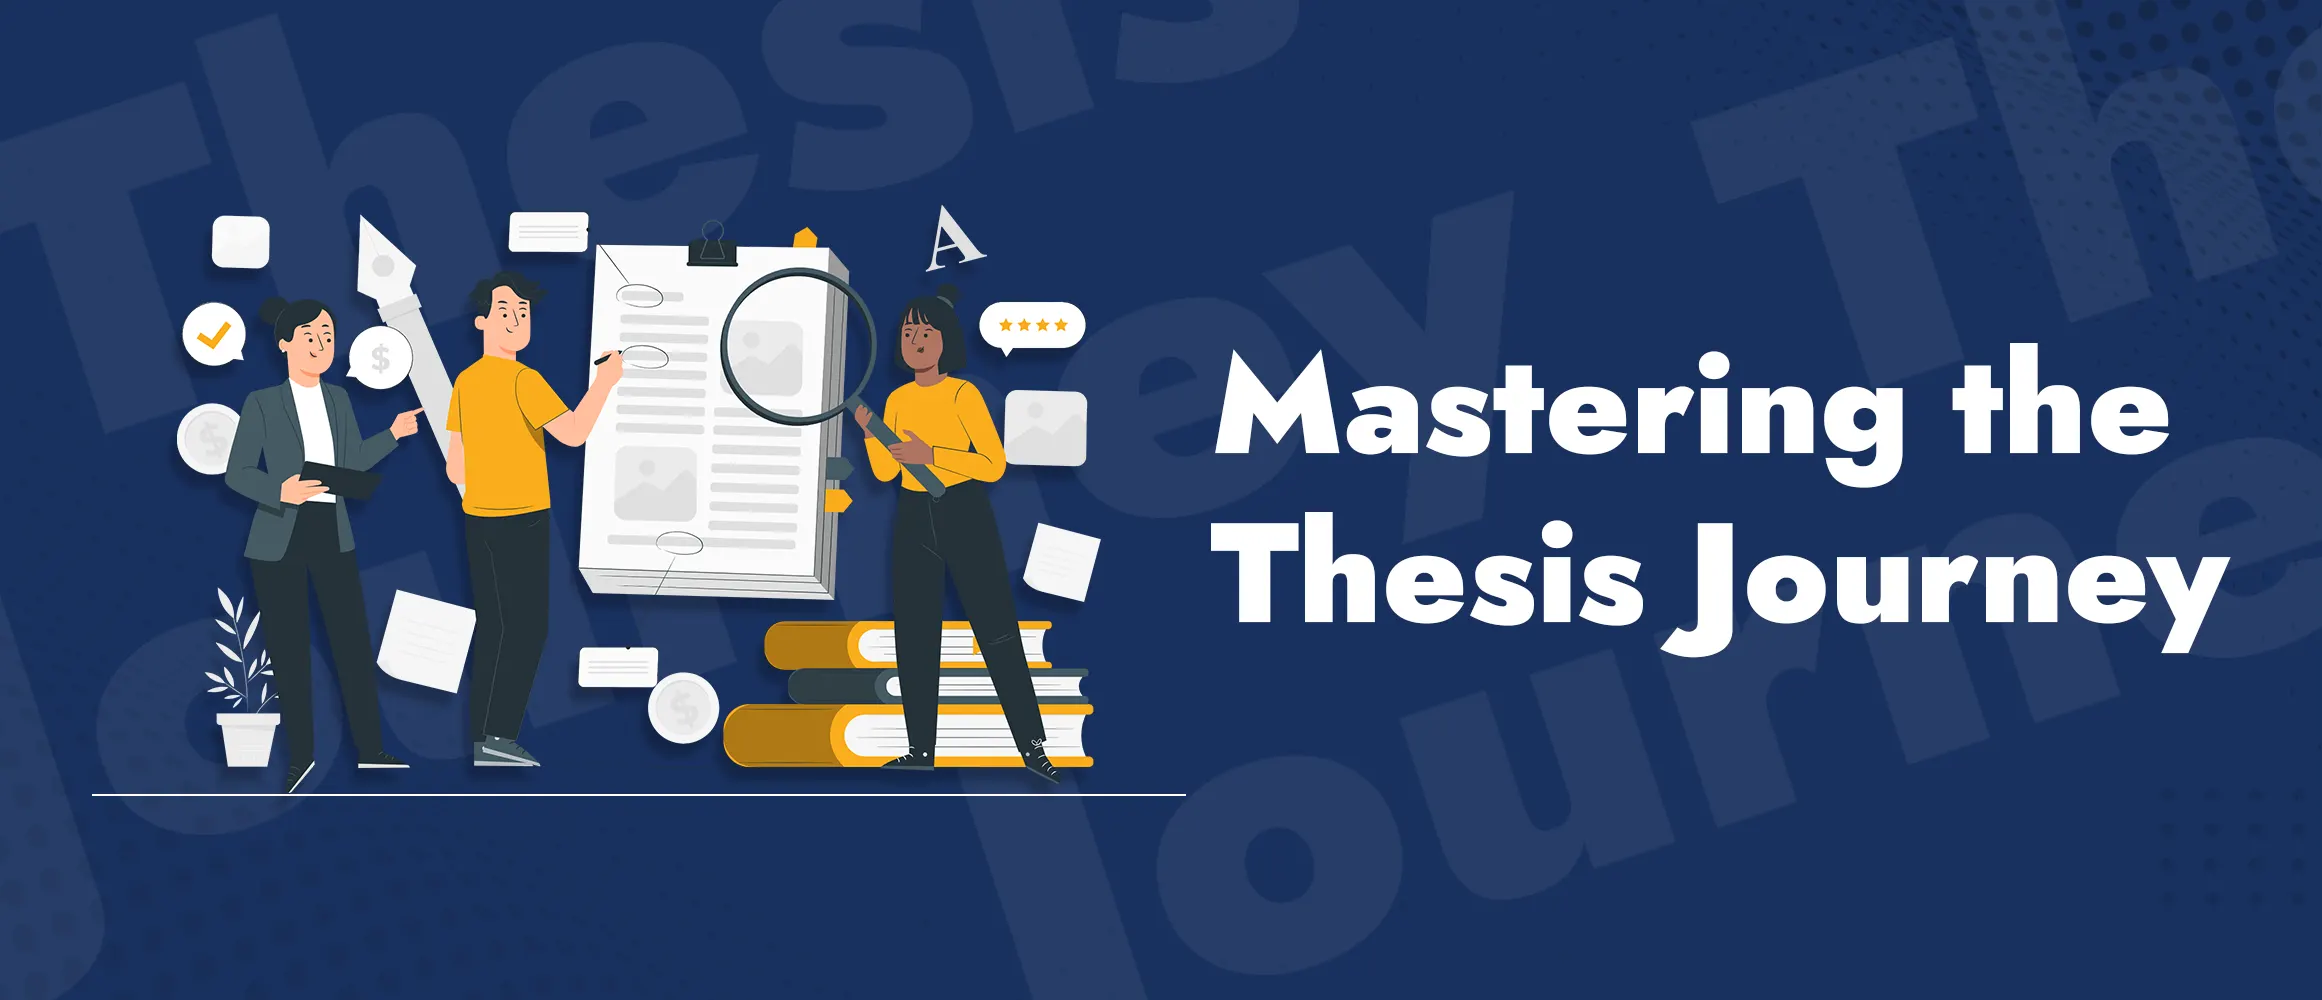 Mastering the Thesis Journey: How PhD Students Conquer their Thesis in the USA